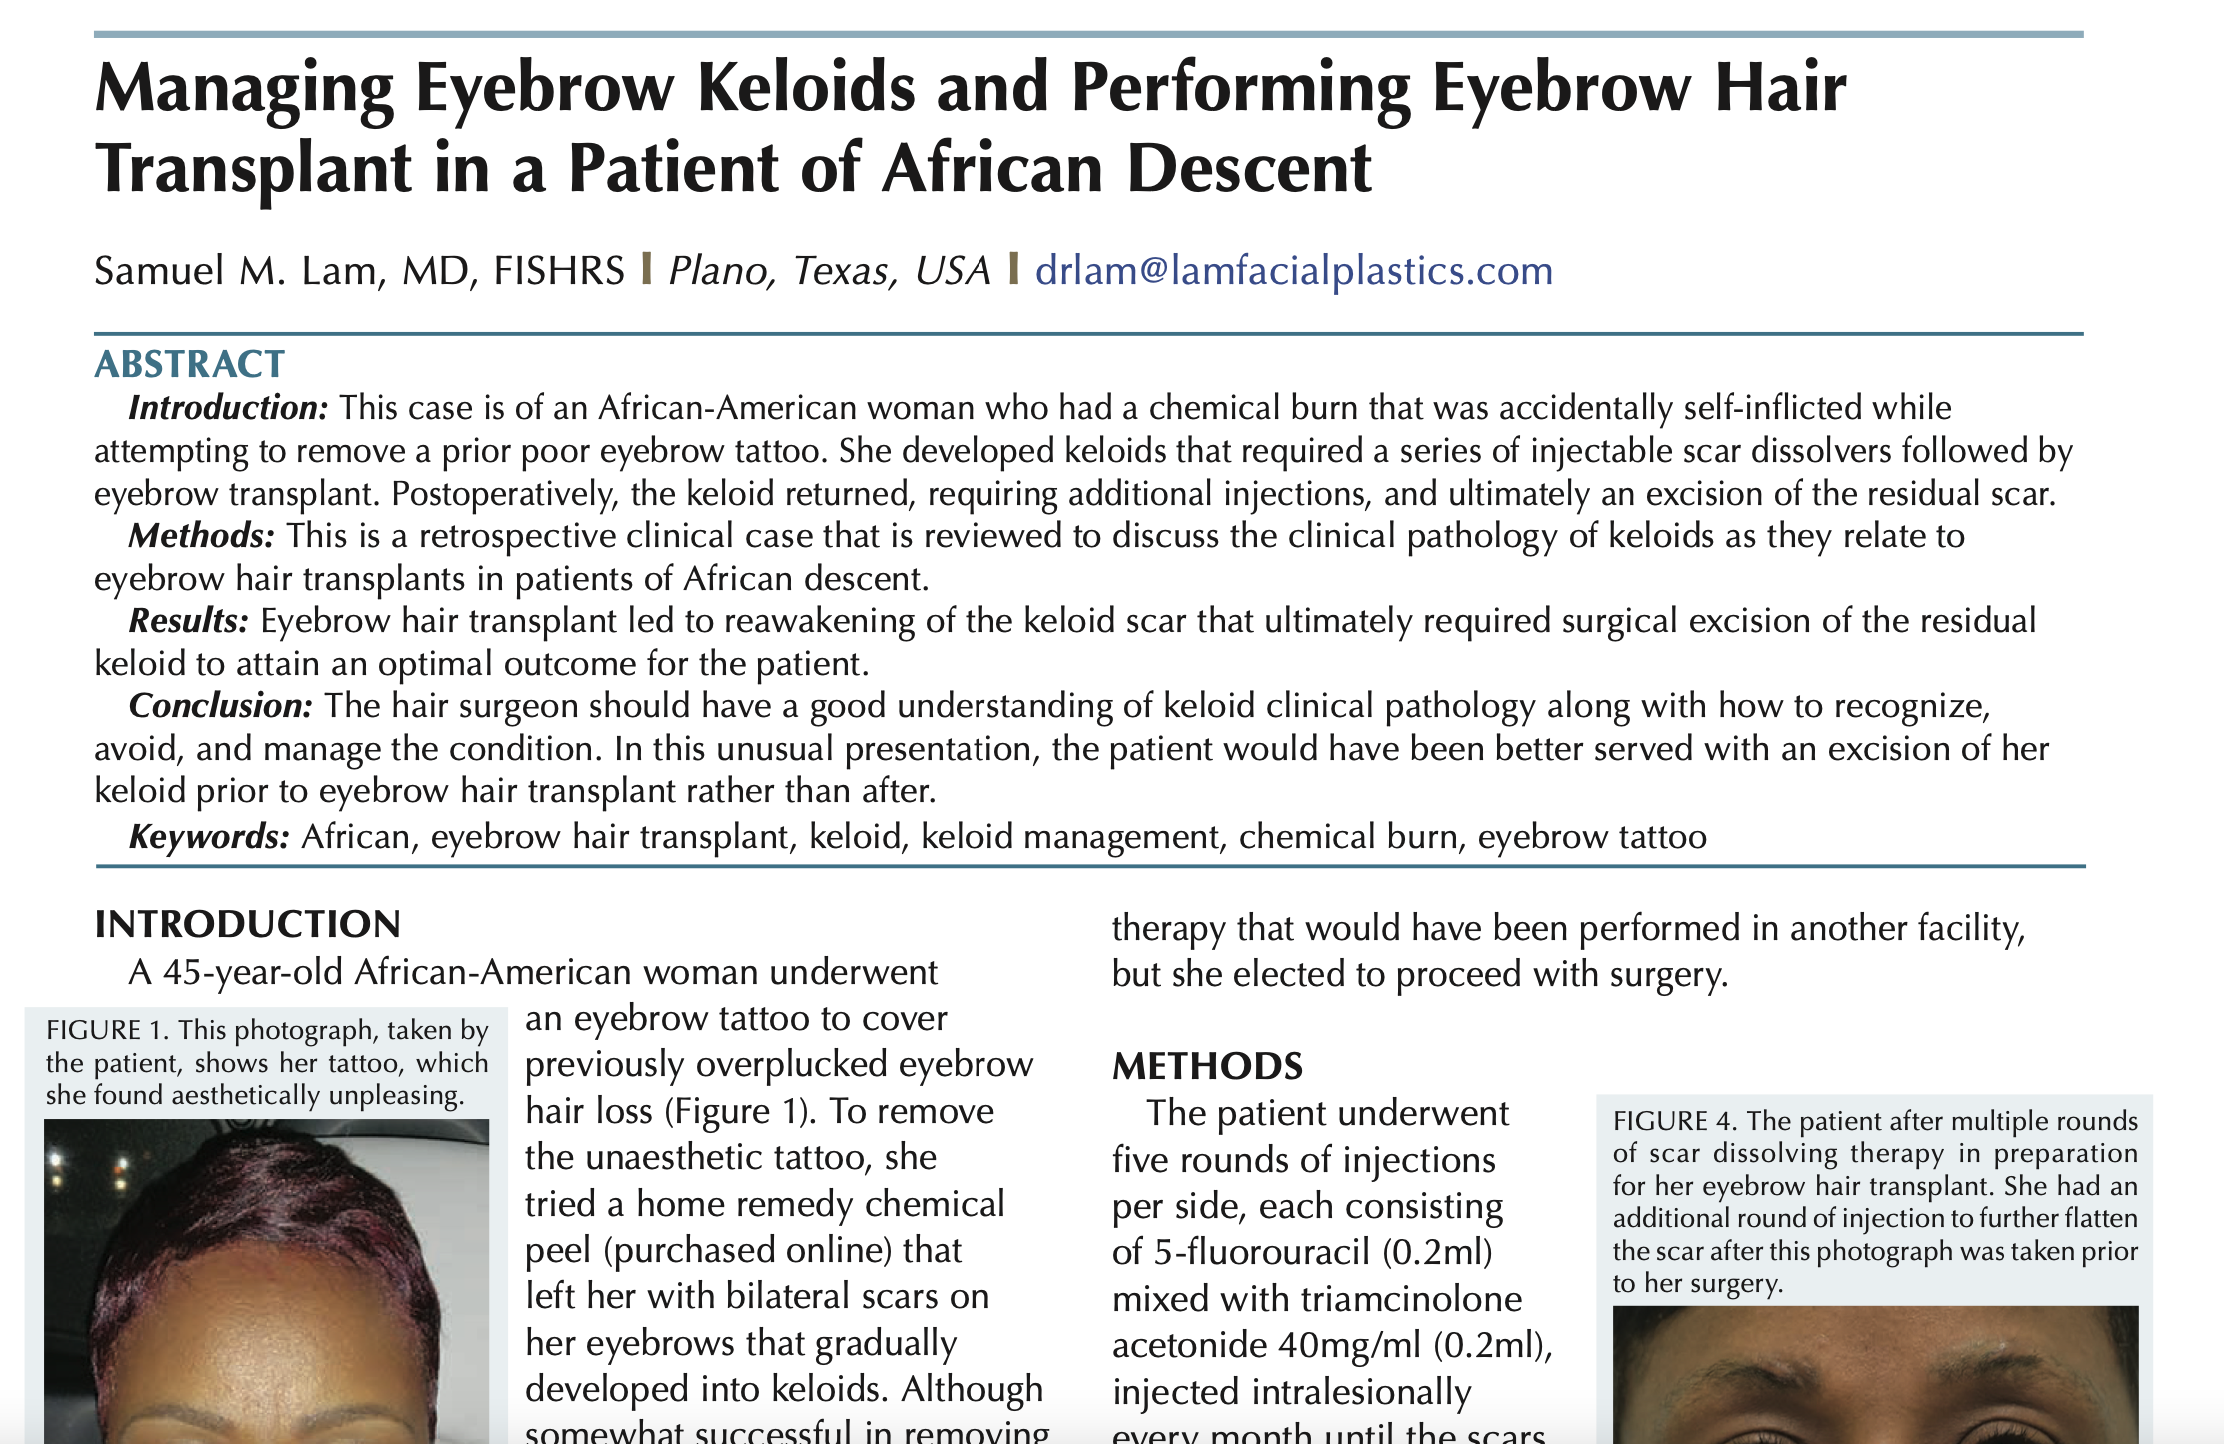 Dr. Samuel M. Lam featured in International Society of Hair Restoration Surgery (ISHRS)